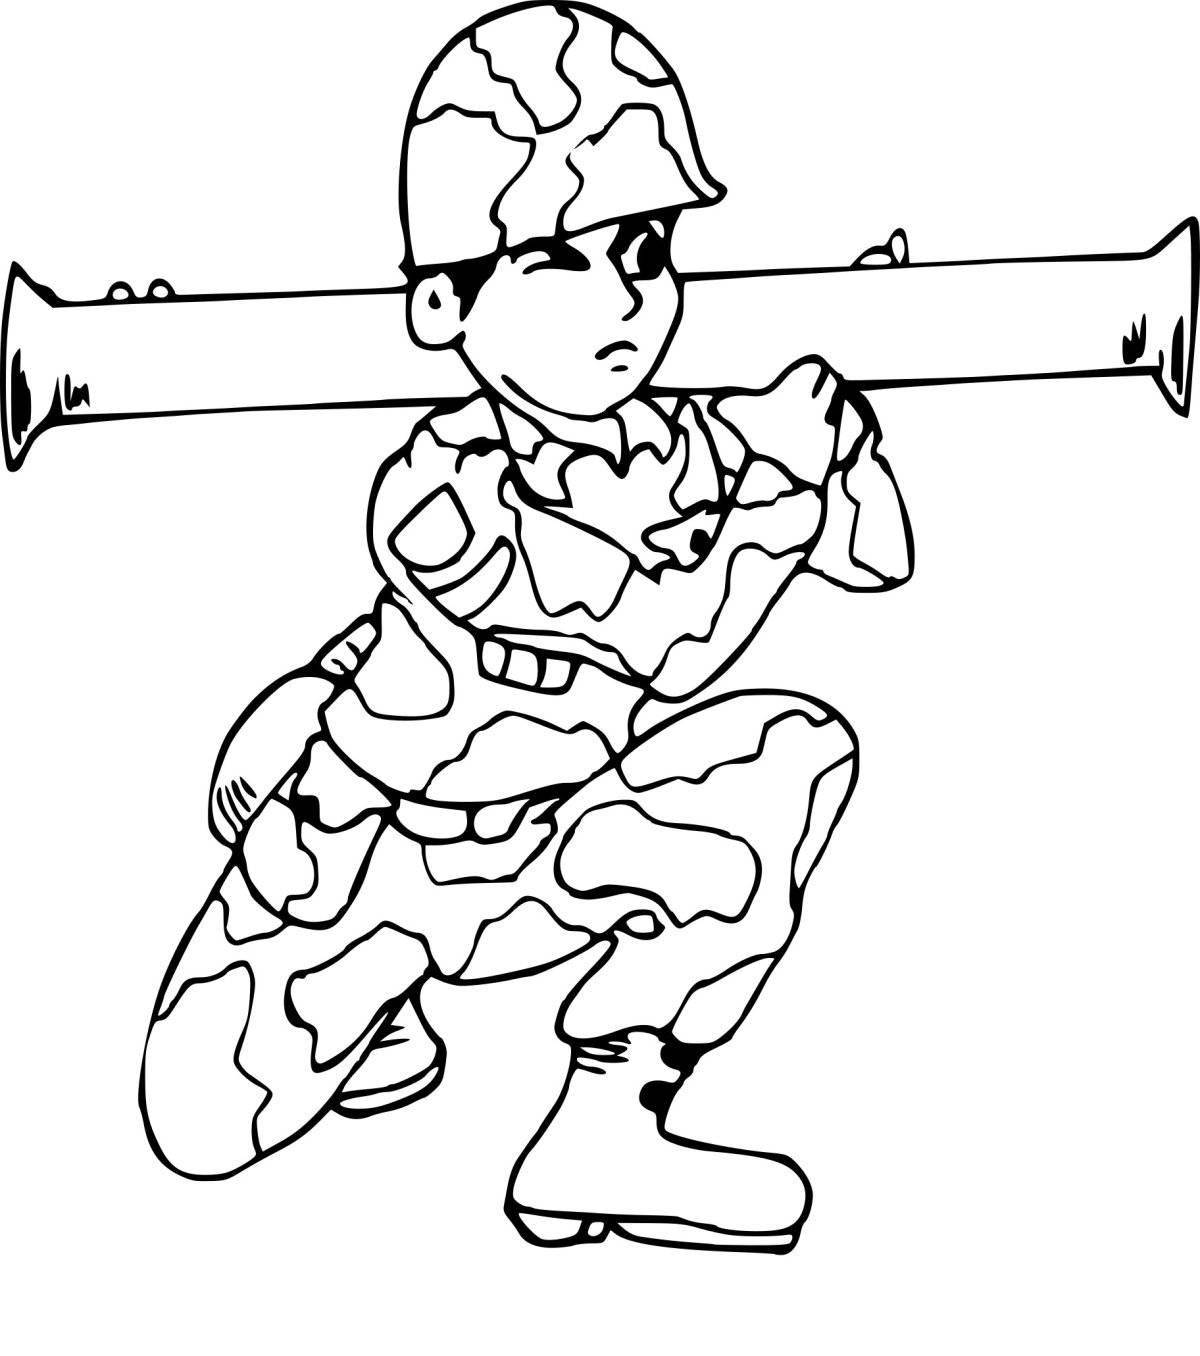 A fascinating coloring book of the military profession for children 3-4 years old